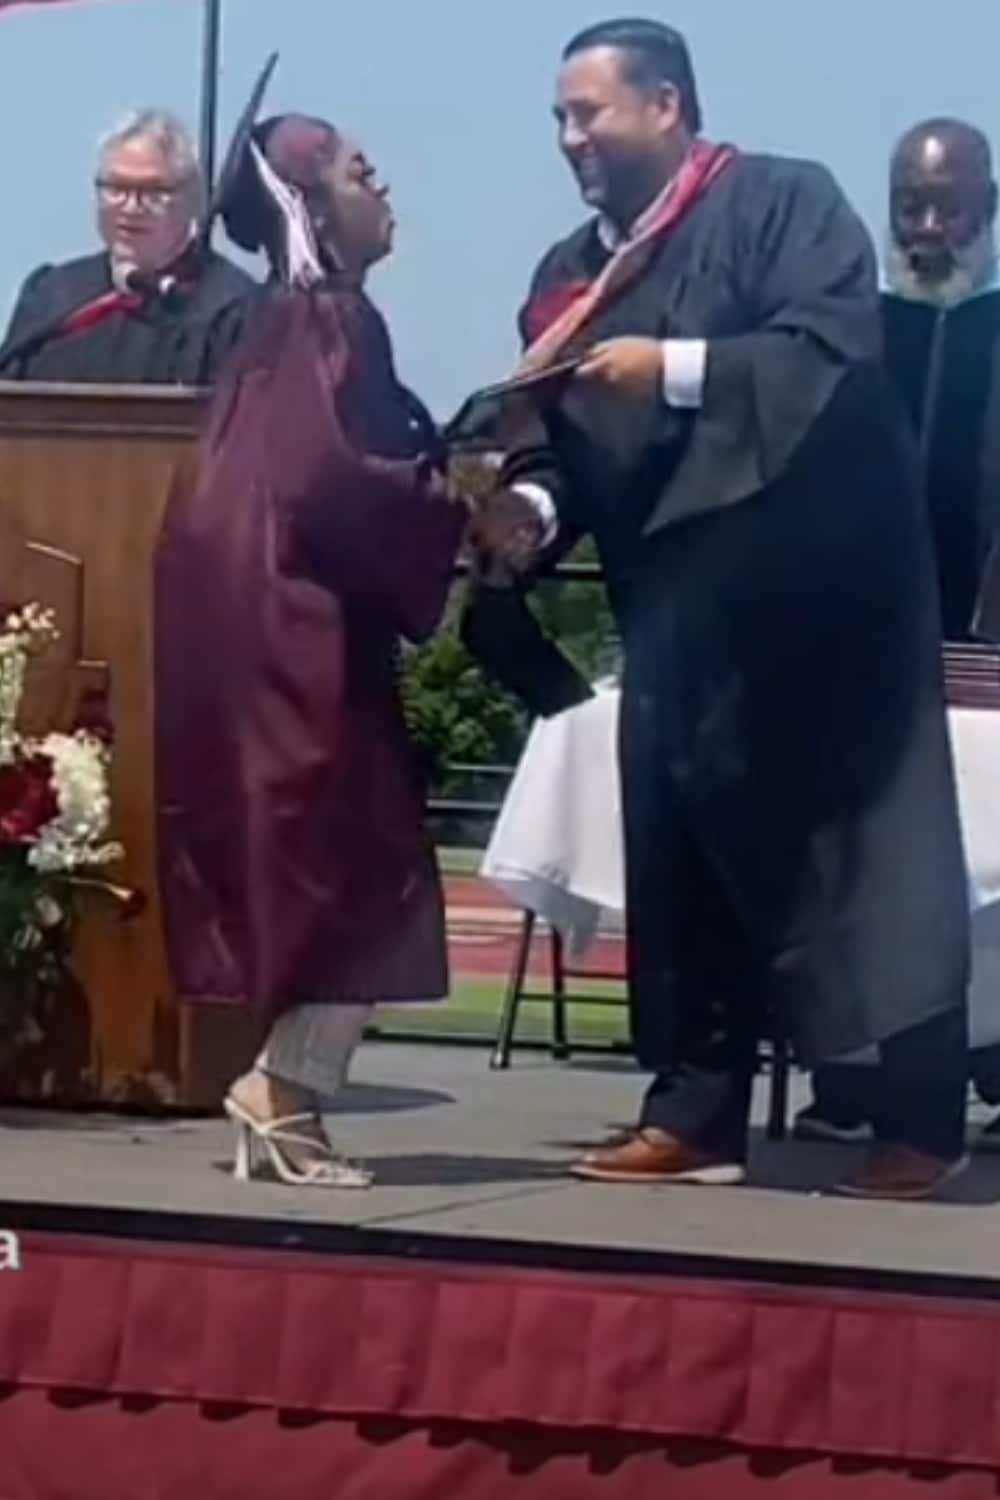 "Uncontainable Joy" - Moment excited lady breaks into dance upon receiving degree (Video)